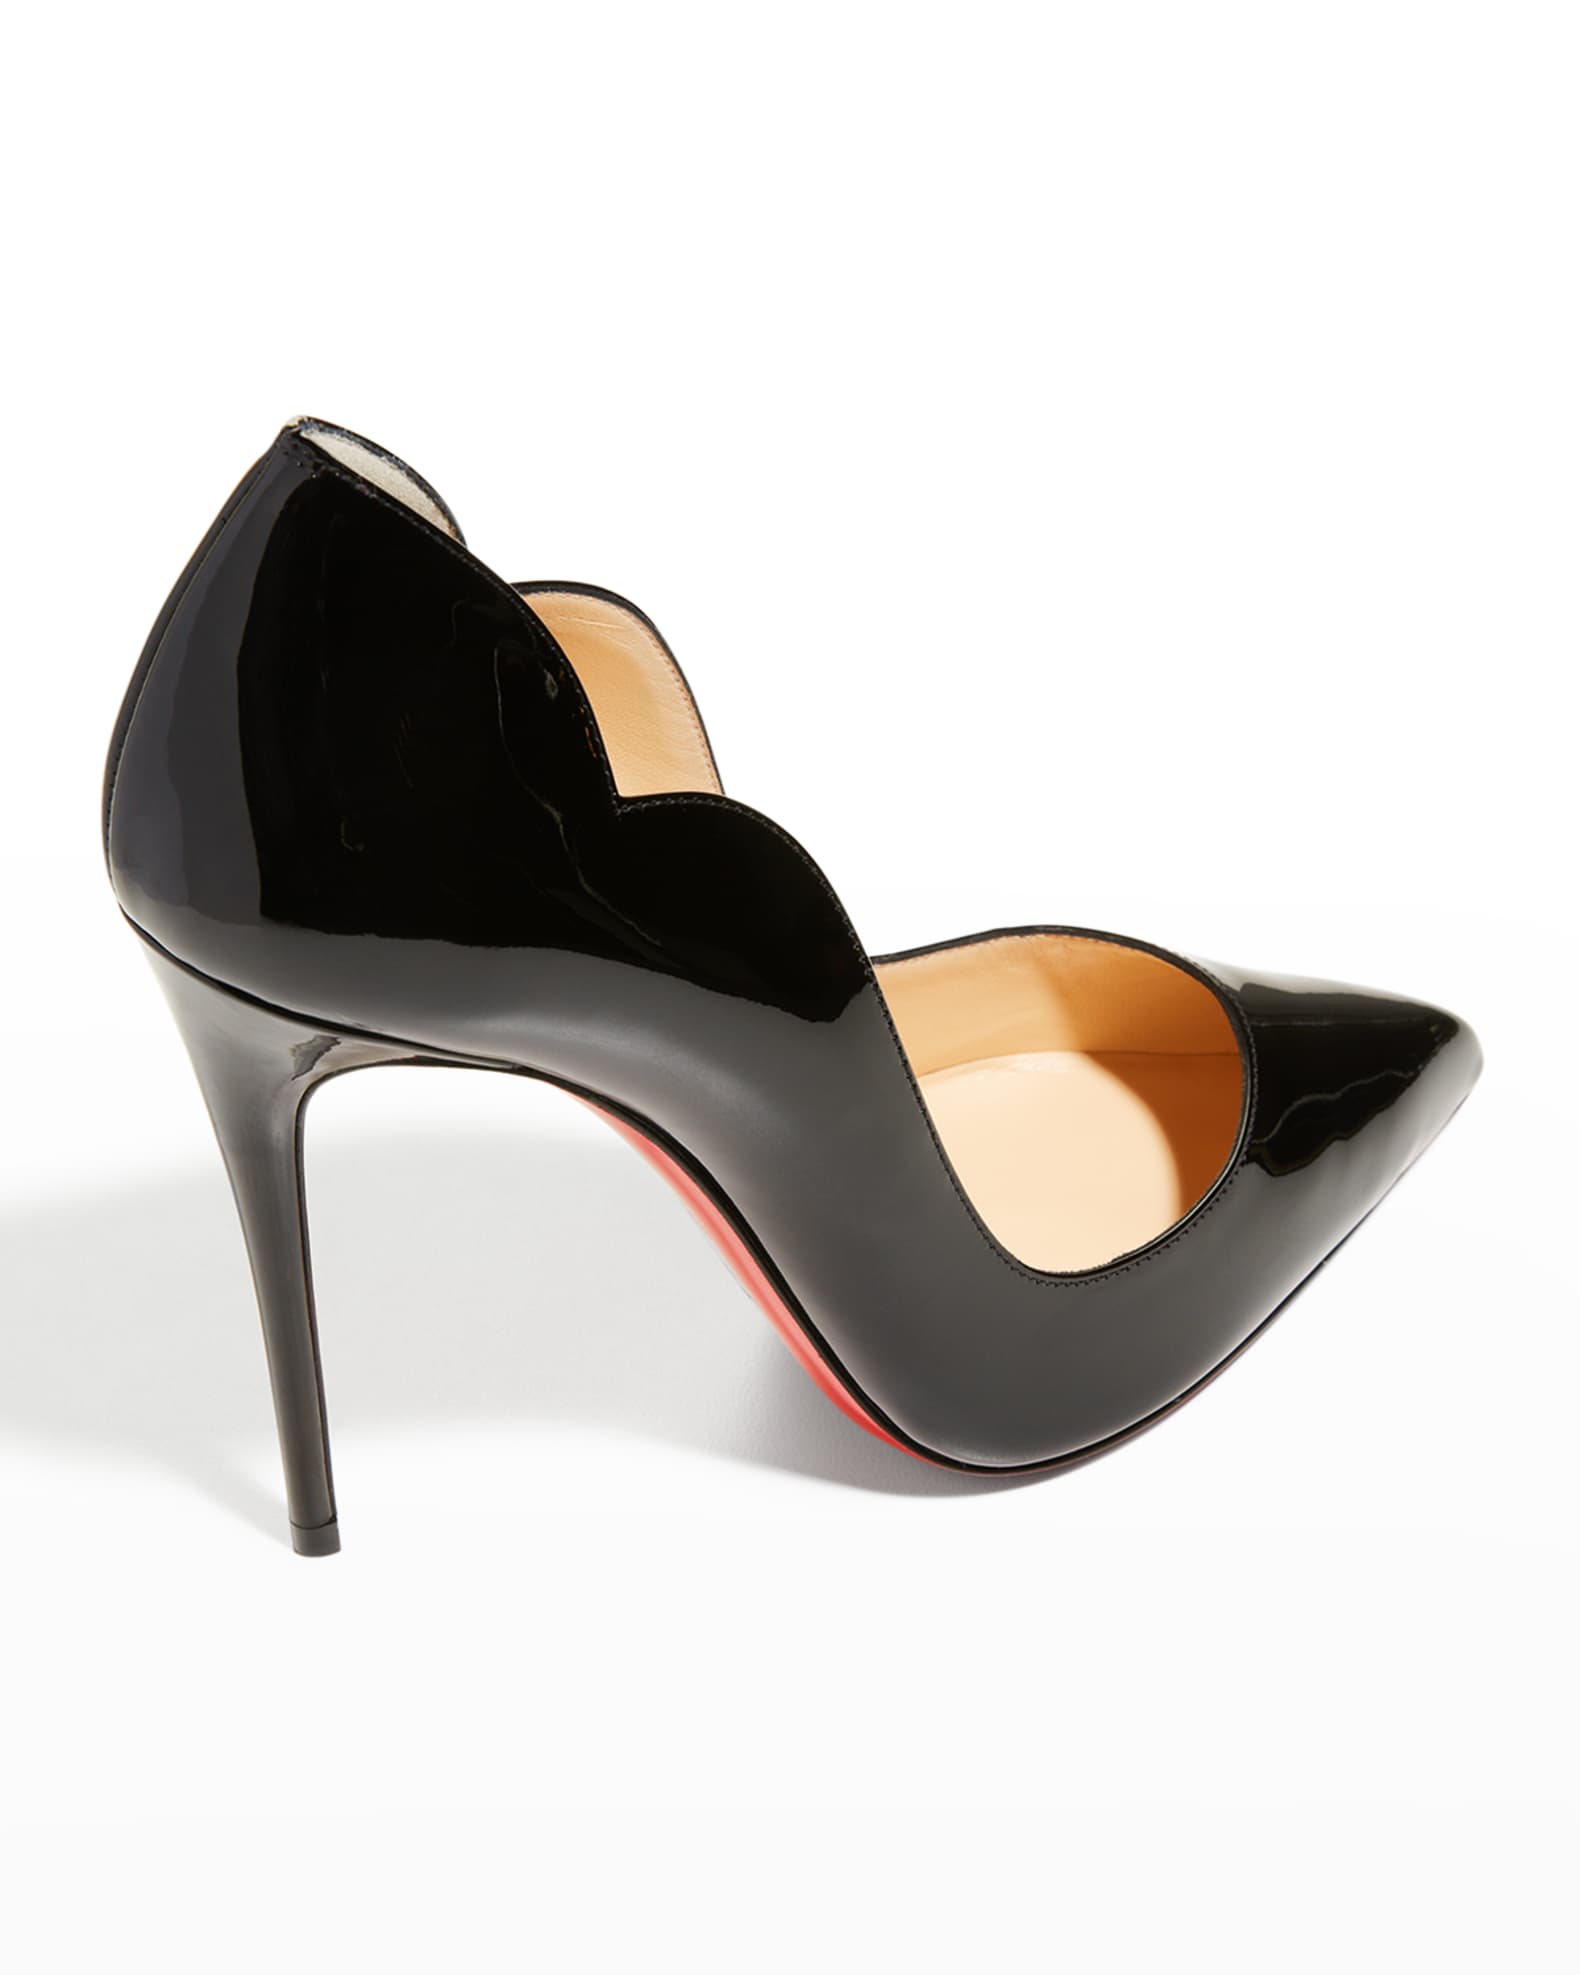 Hot Chick 100 Blue Patent leather - Women Shoes - Christian Louboutin